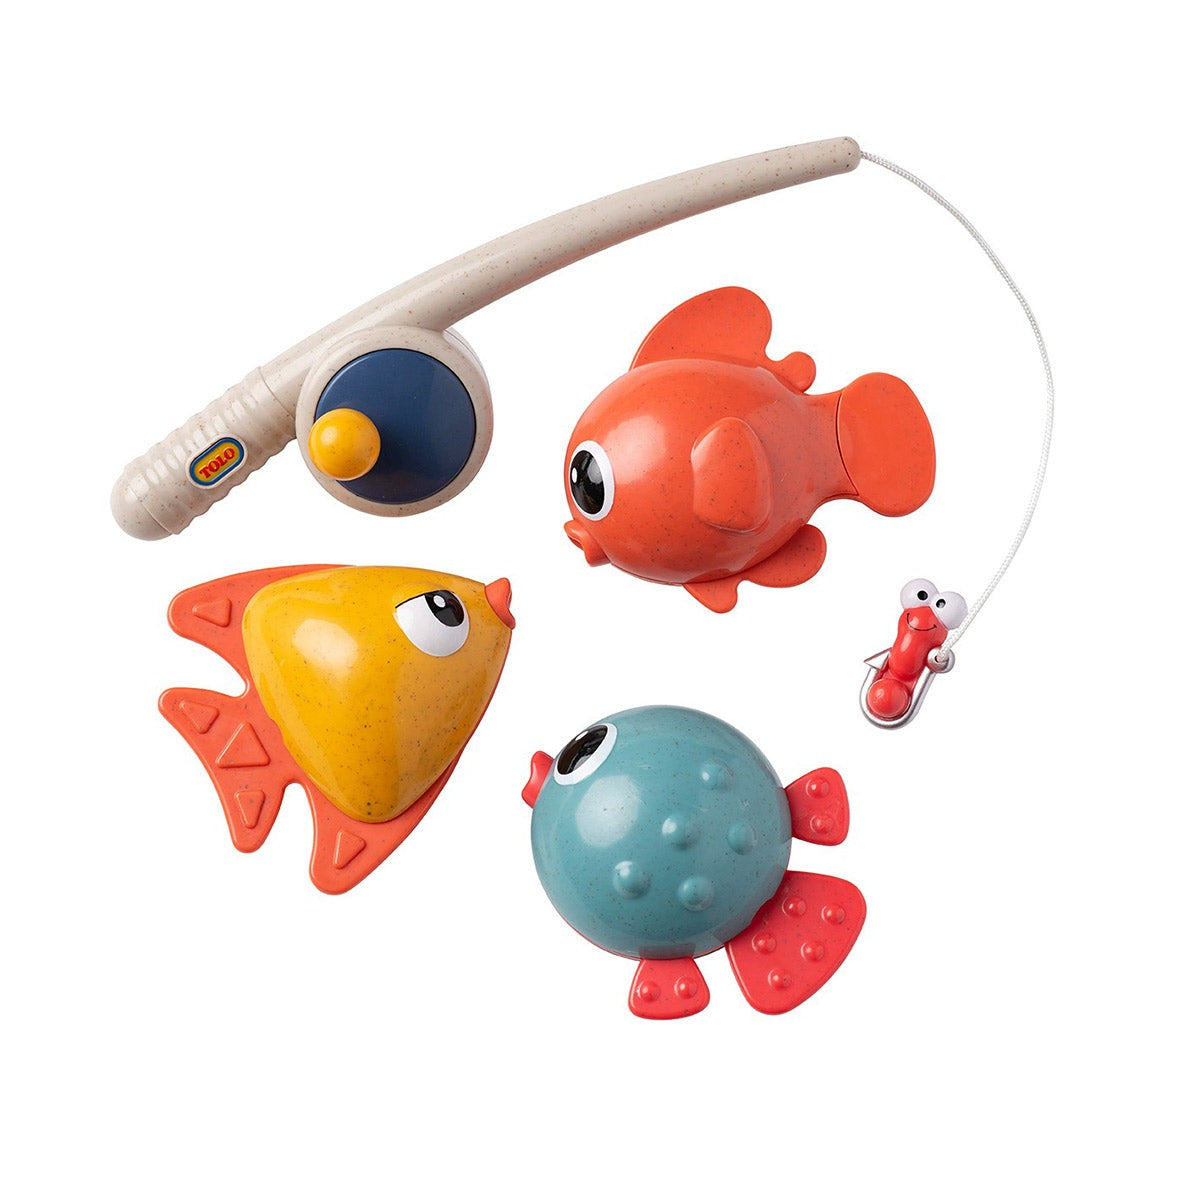 fishing rod toy - angus and dudley